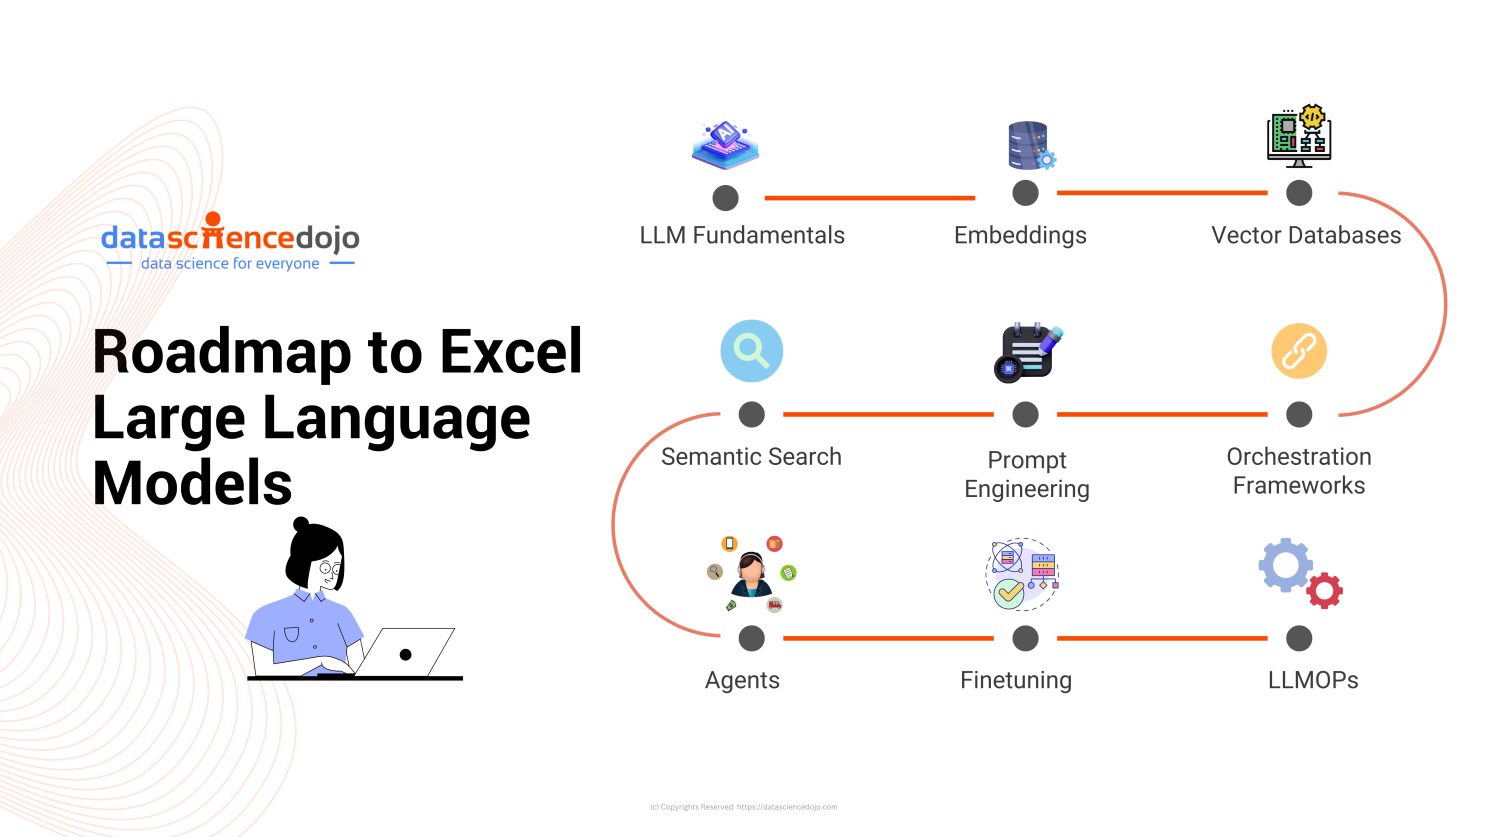 Roadmap to Excel in Large Language Models